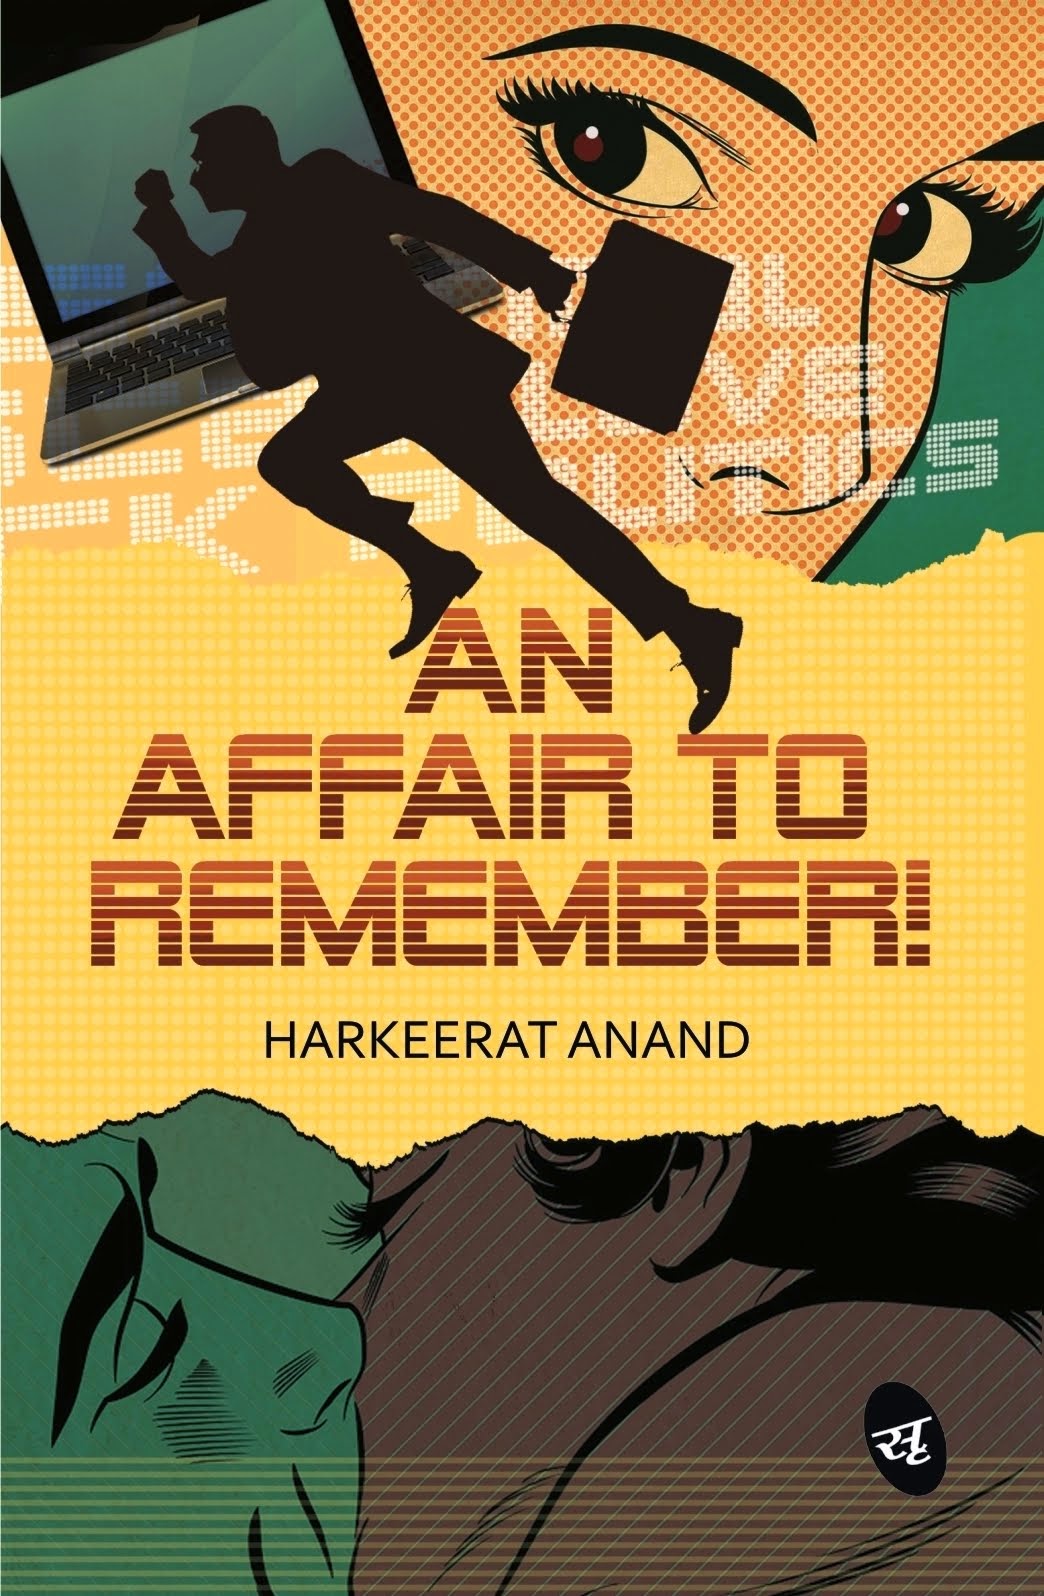 An Affair to Remember!